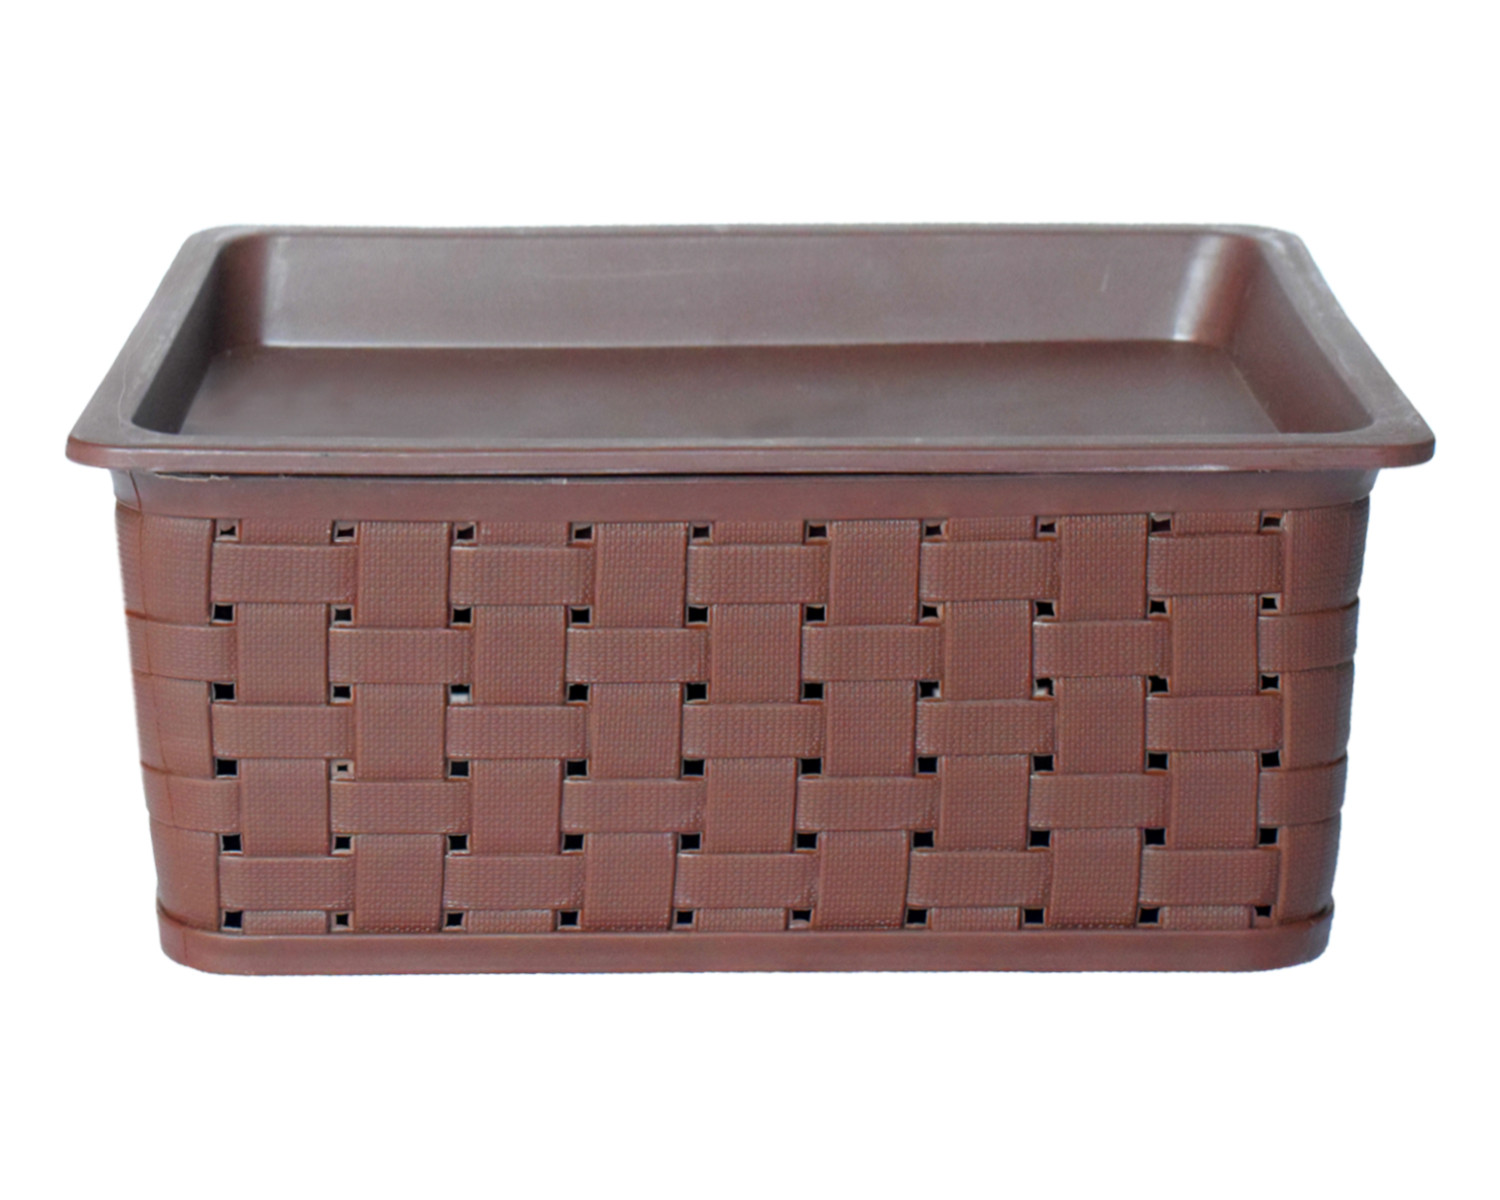 Kuber Industries BPA Free Attractive Design Multipurpose Small Trendy Storage Basket With Lid|Material-Plastic|Color-Brown,Beige|Pack of 2